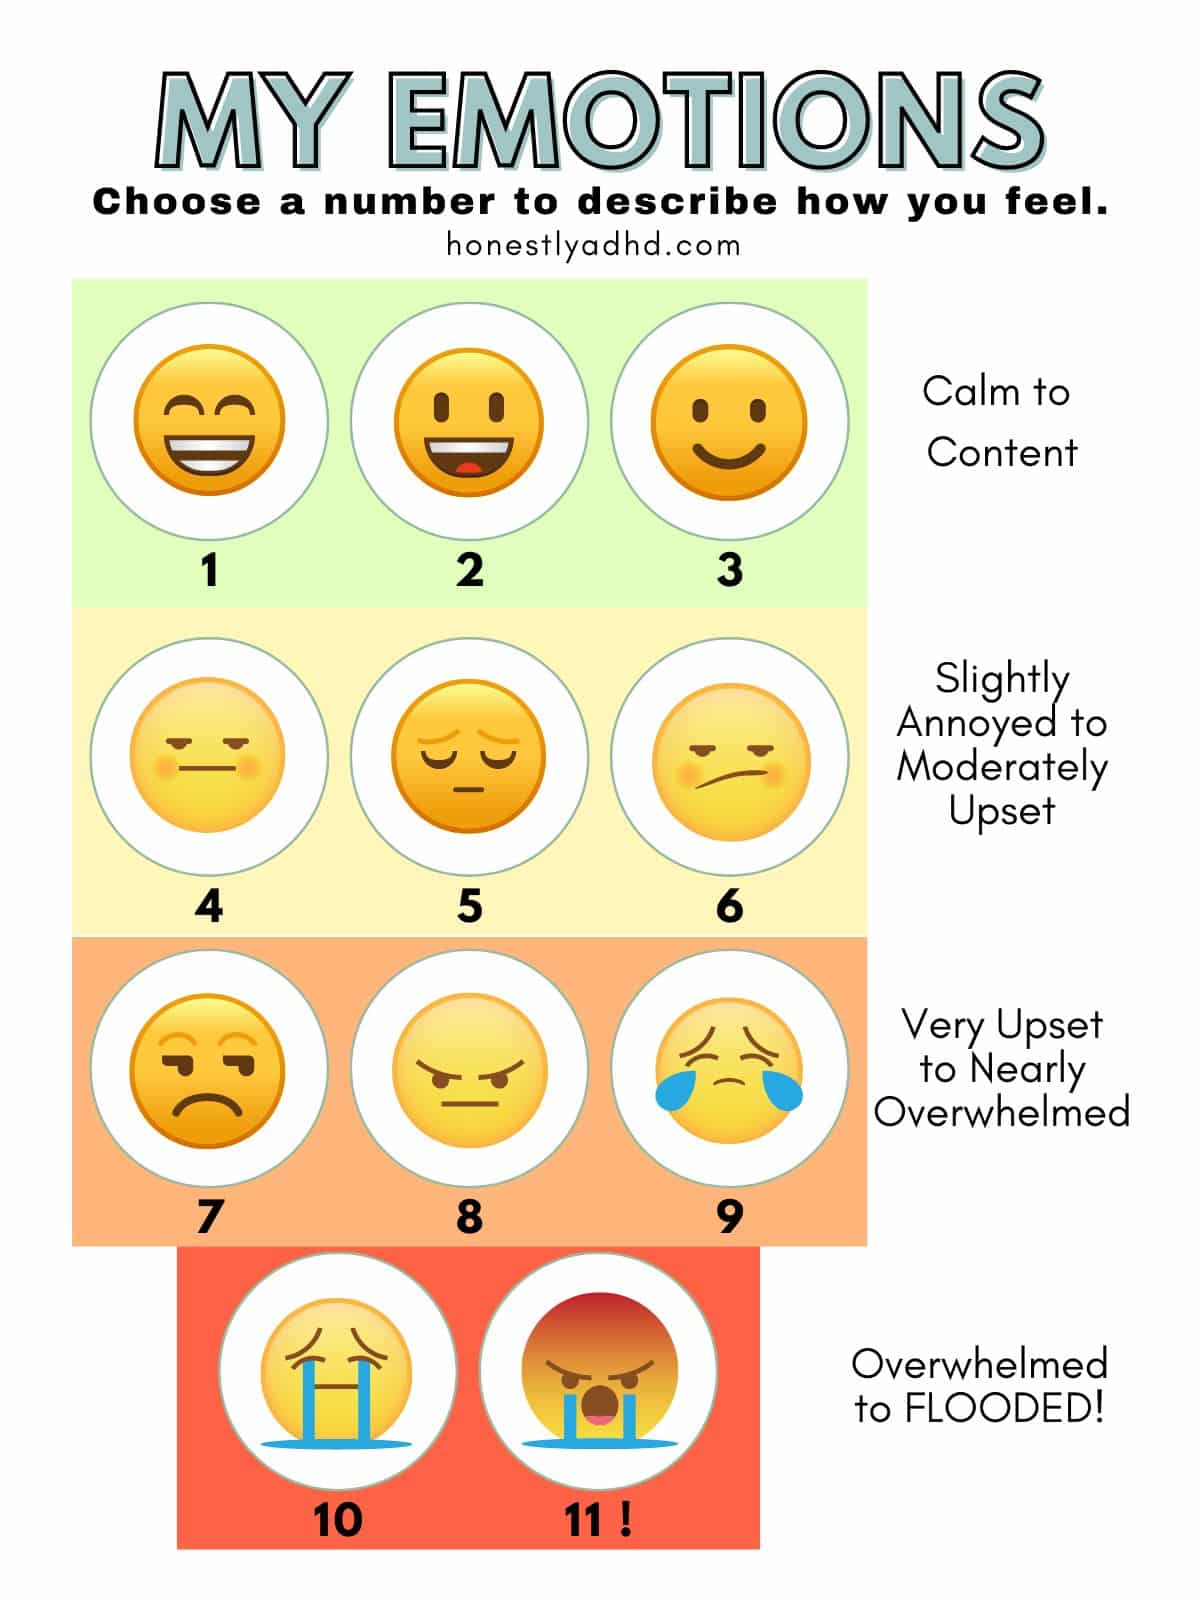 An ADHD Emotion Intensity Scale that has an emotion scale from 1-11 with emoji faces showing the emotion numbers from calm to flooded.